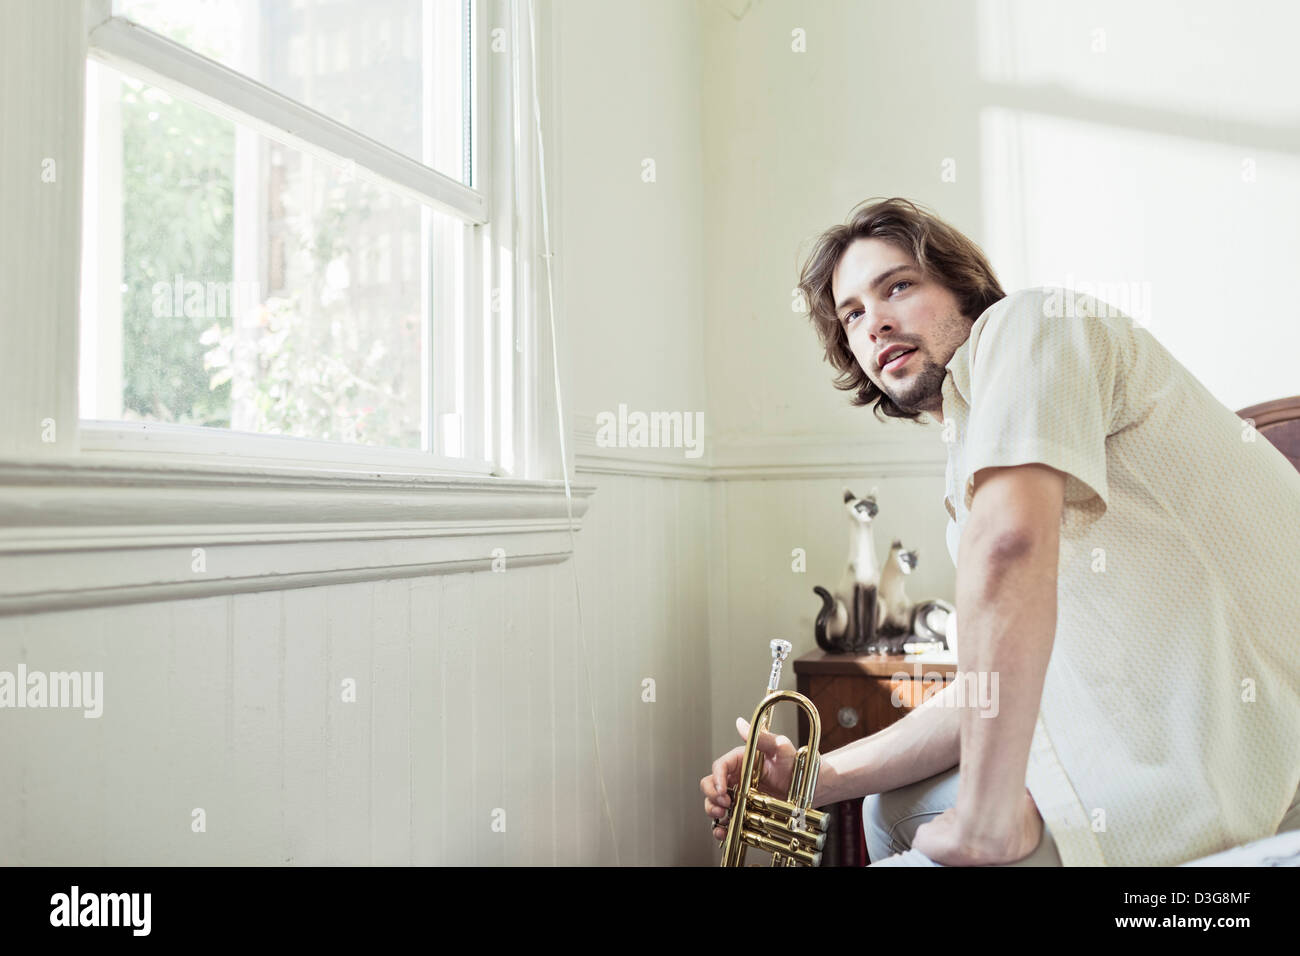 Young male trumpet player practicing at home in bed. Stock Photo